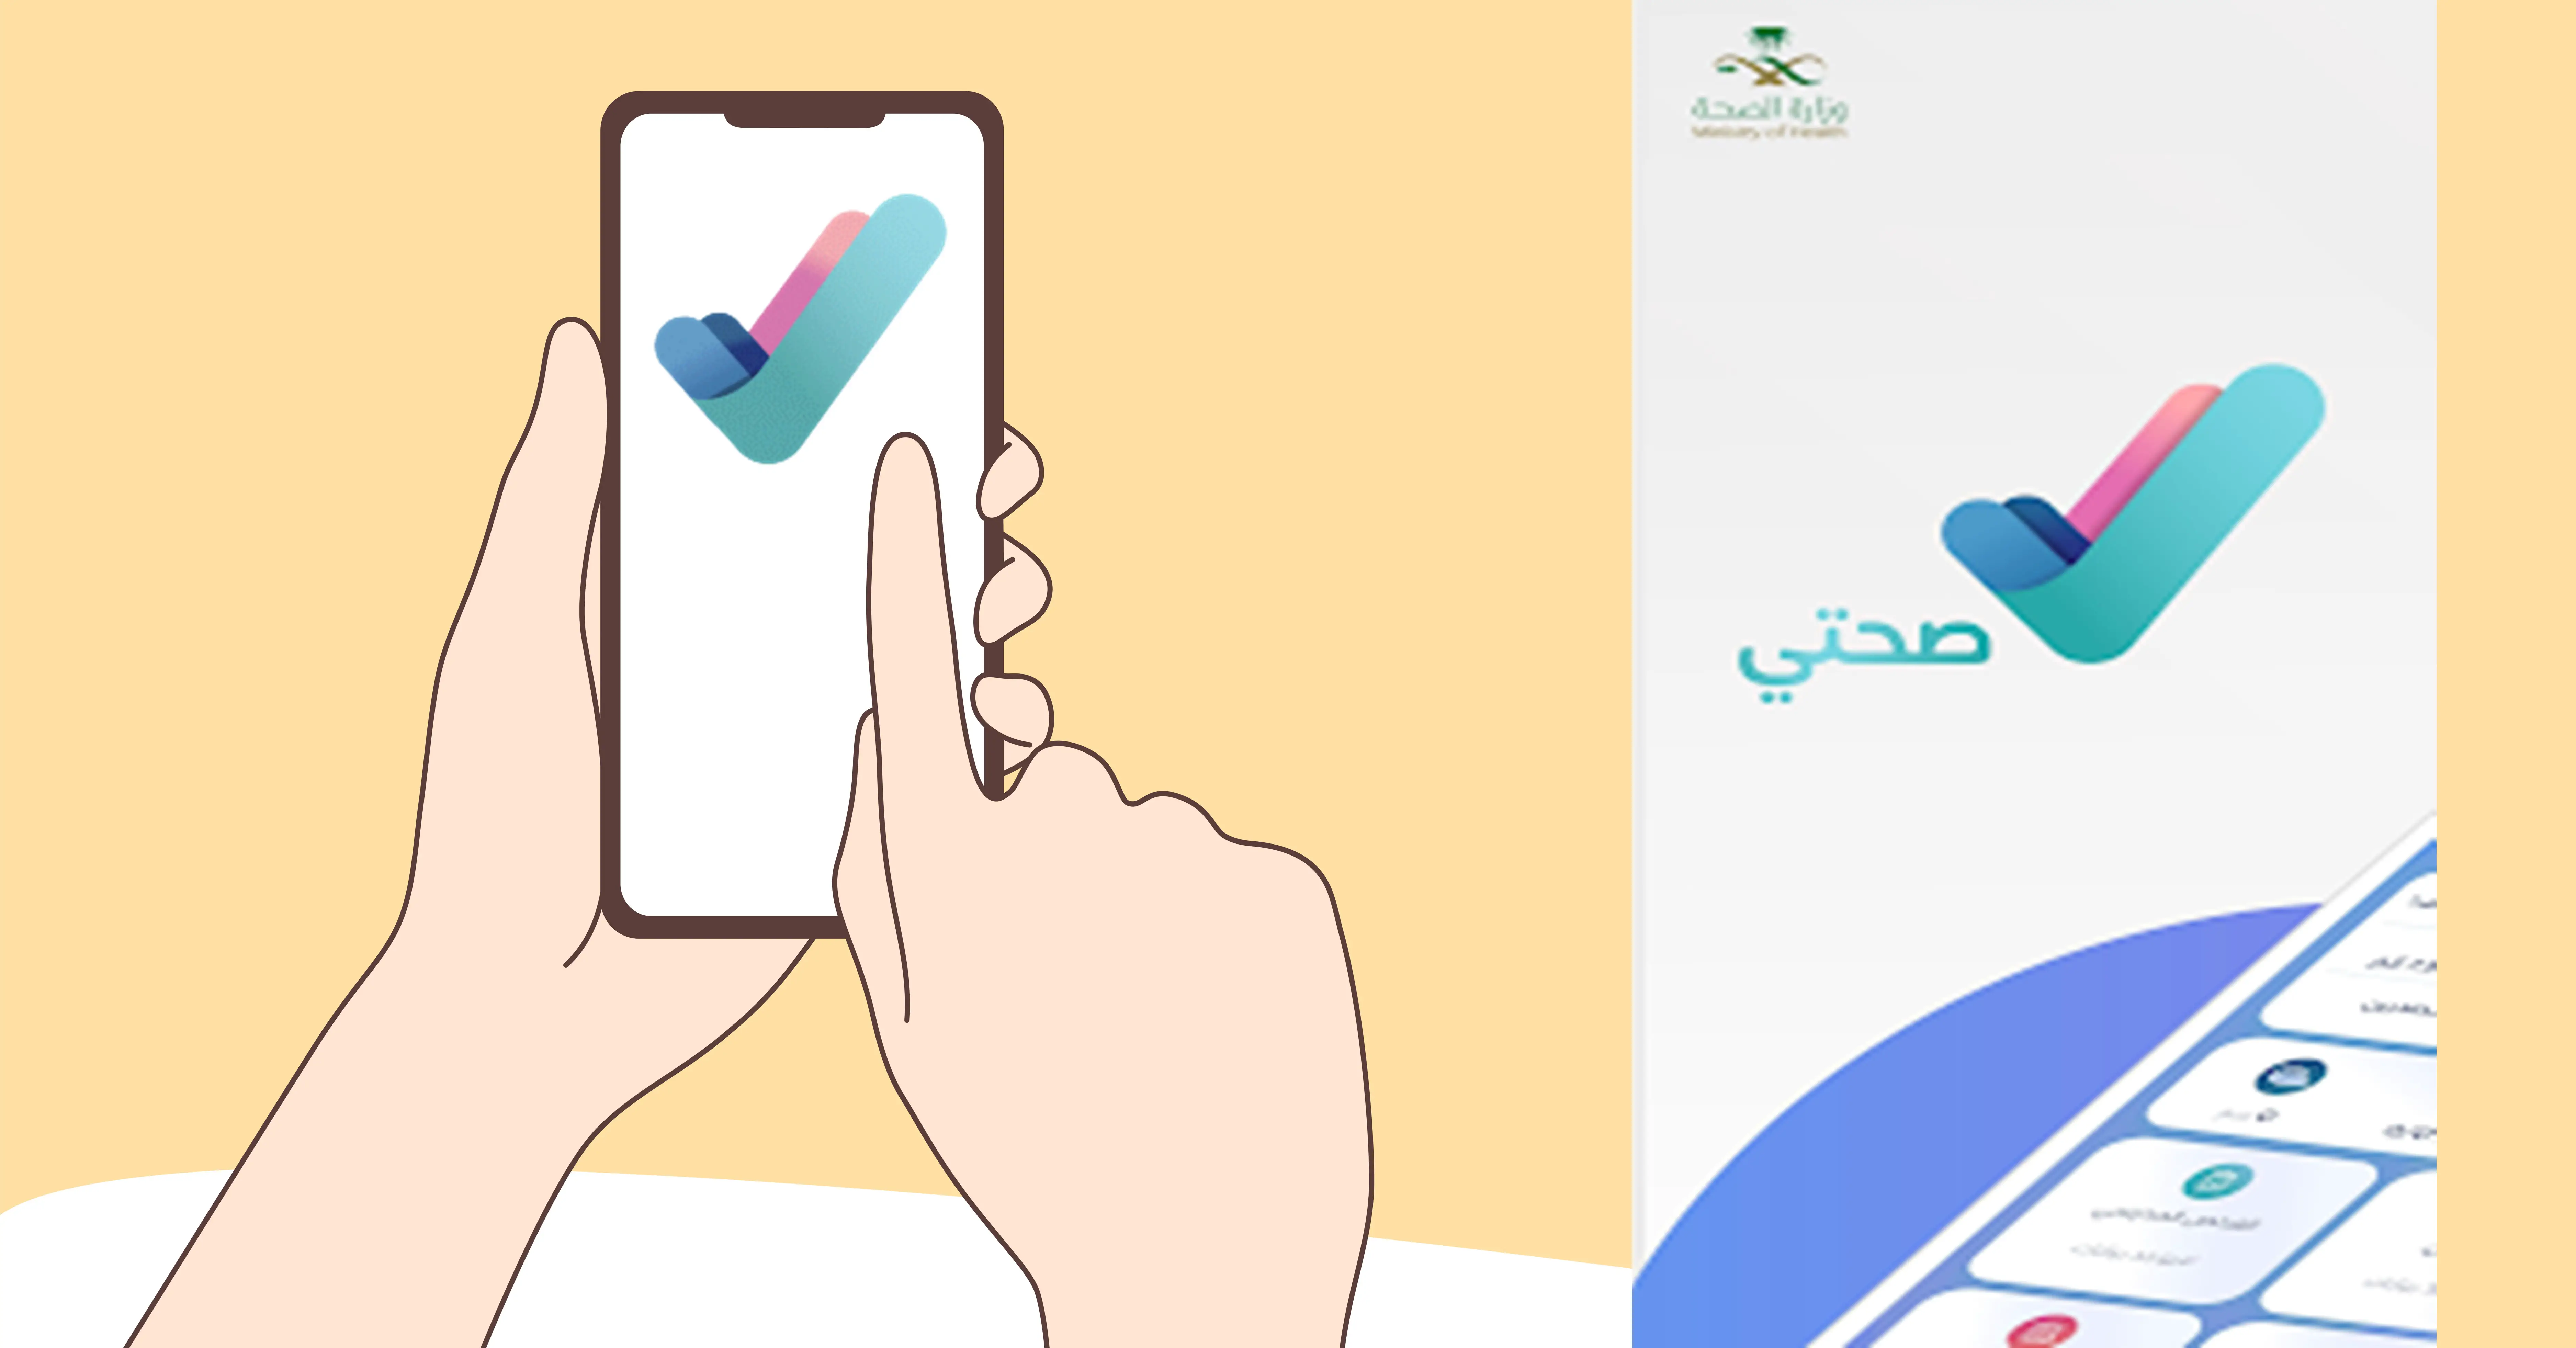 How to Register for COVID-19 Vaccination Using the Sehhaty App